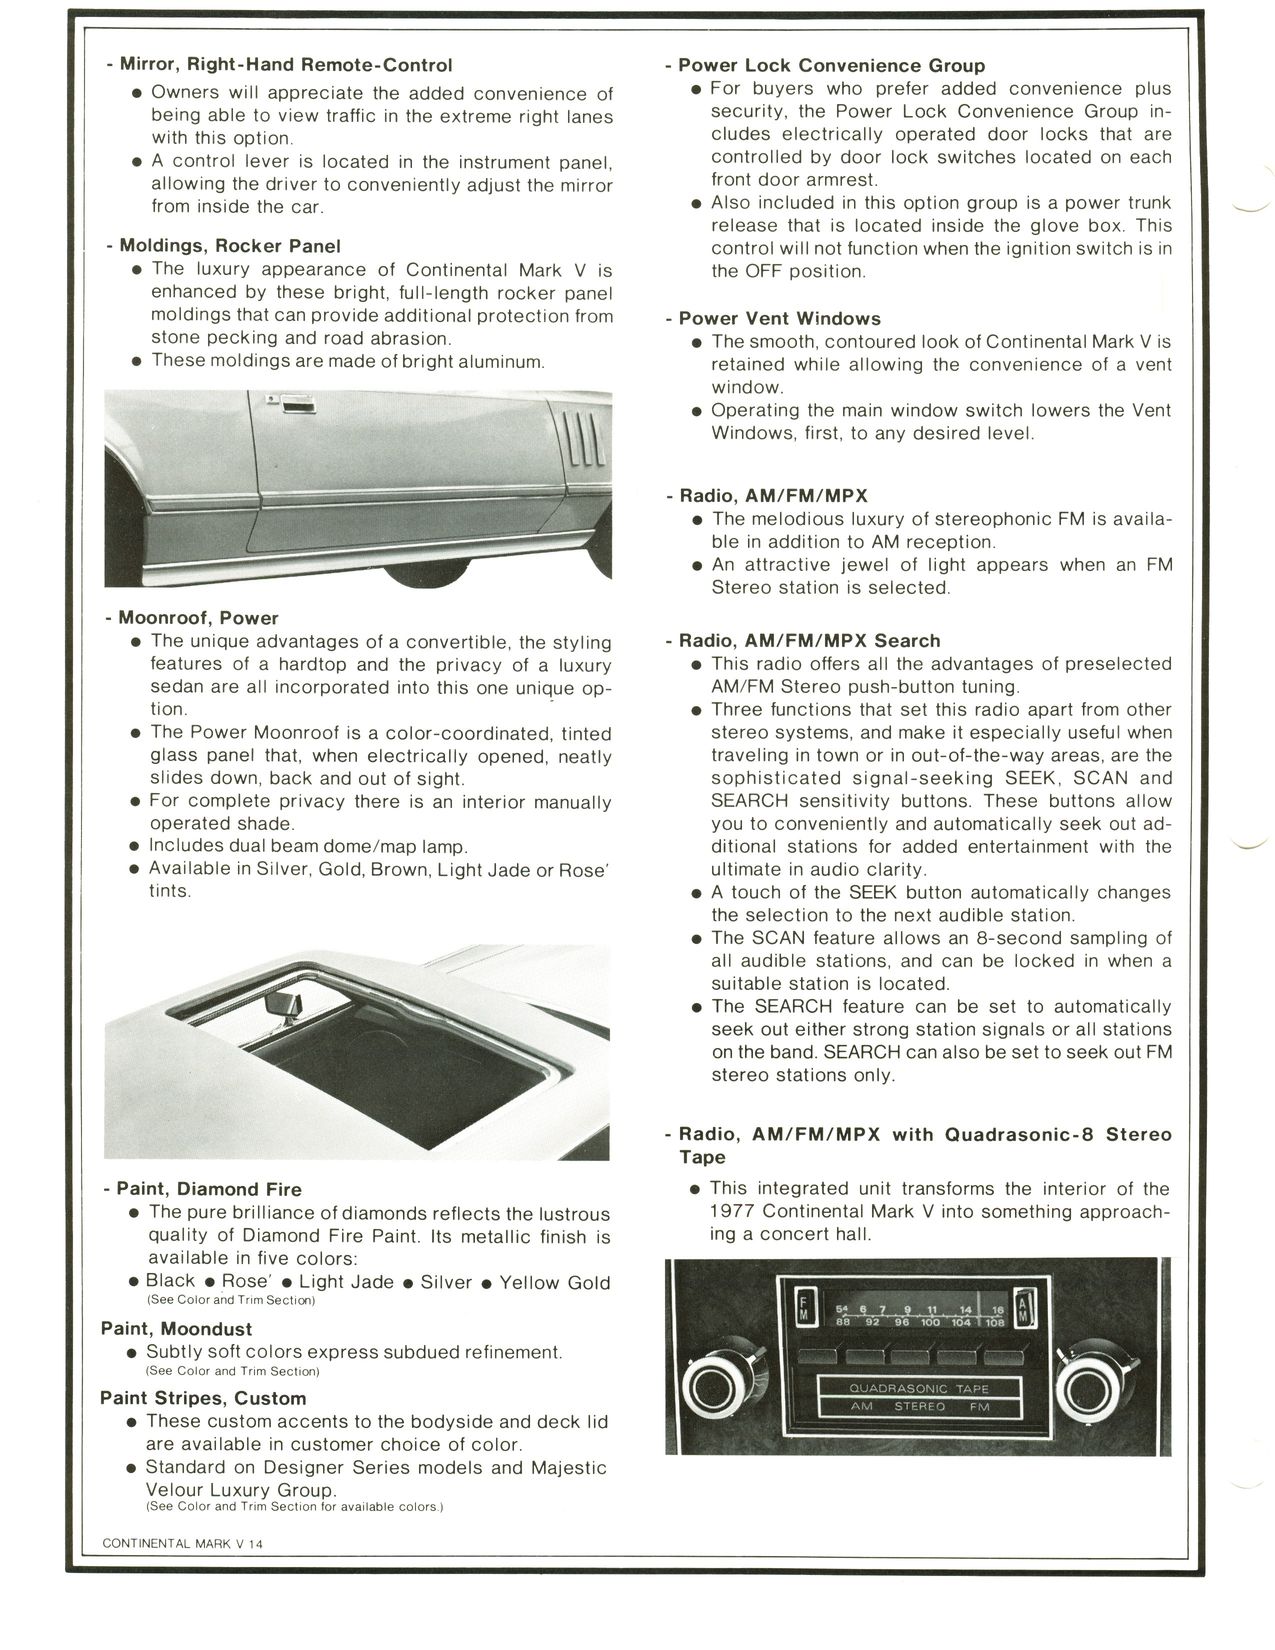 1977 Continental Product Facts Book-1-14